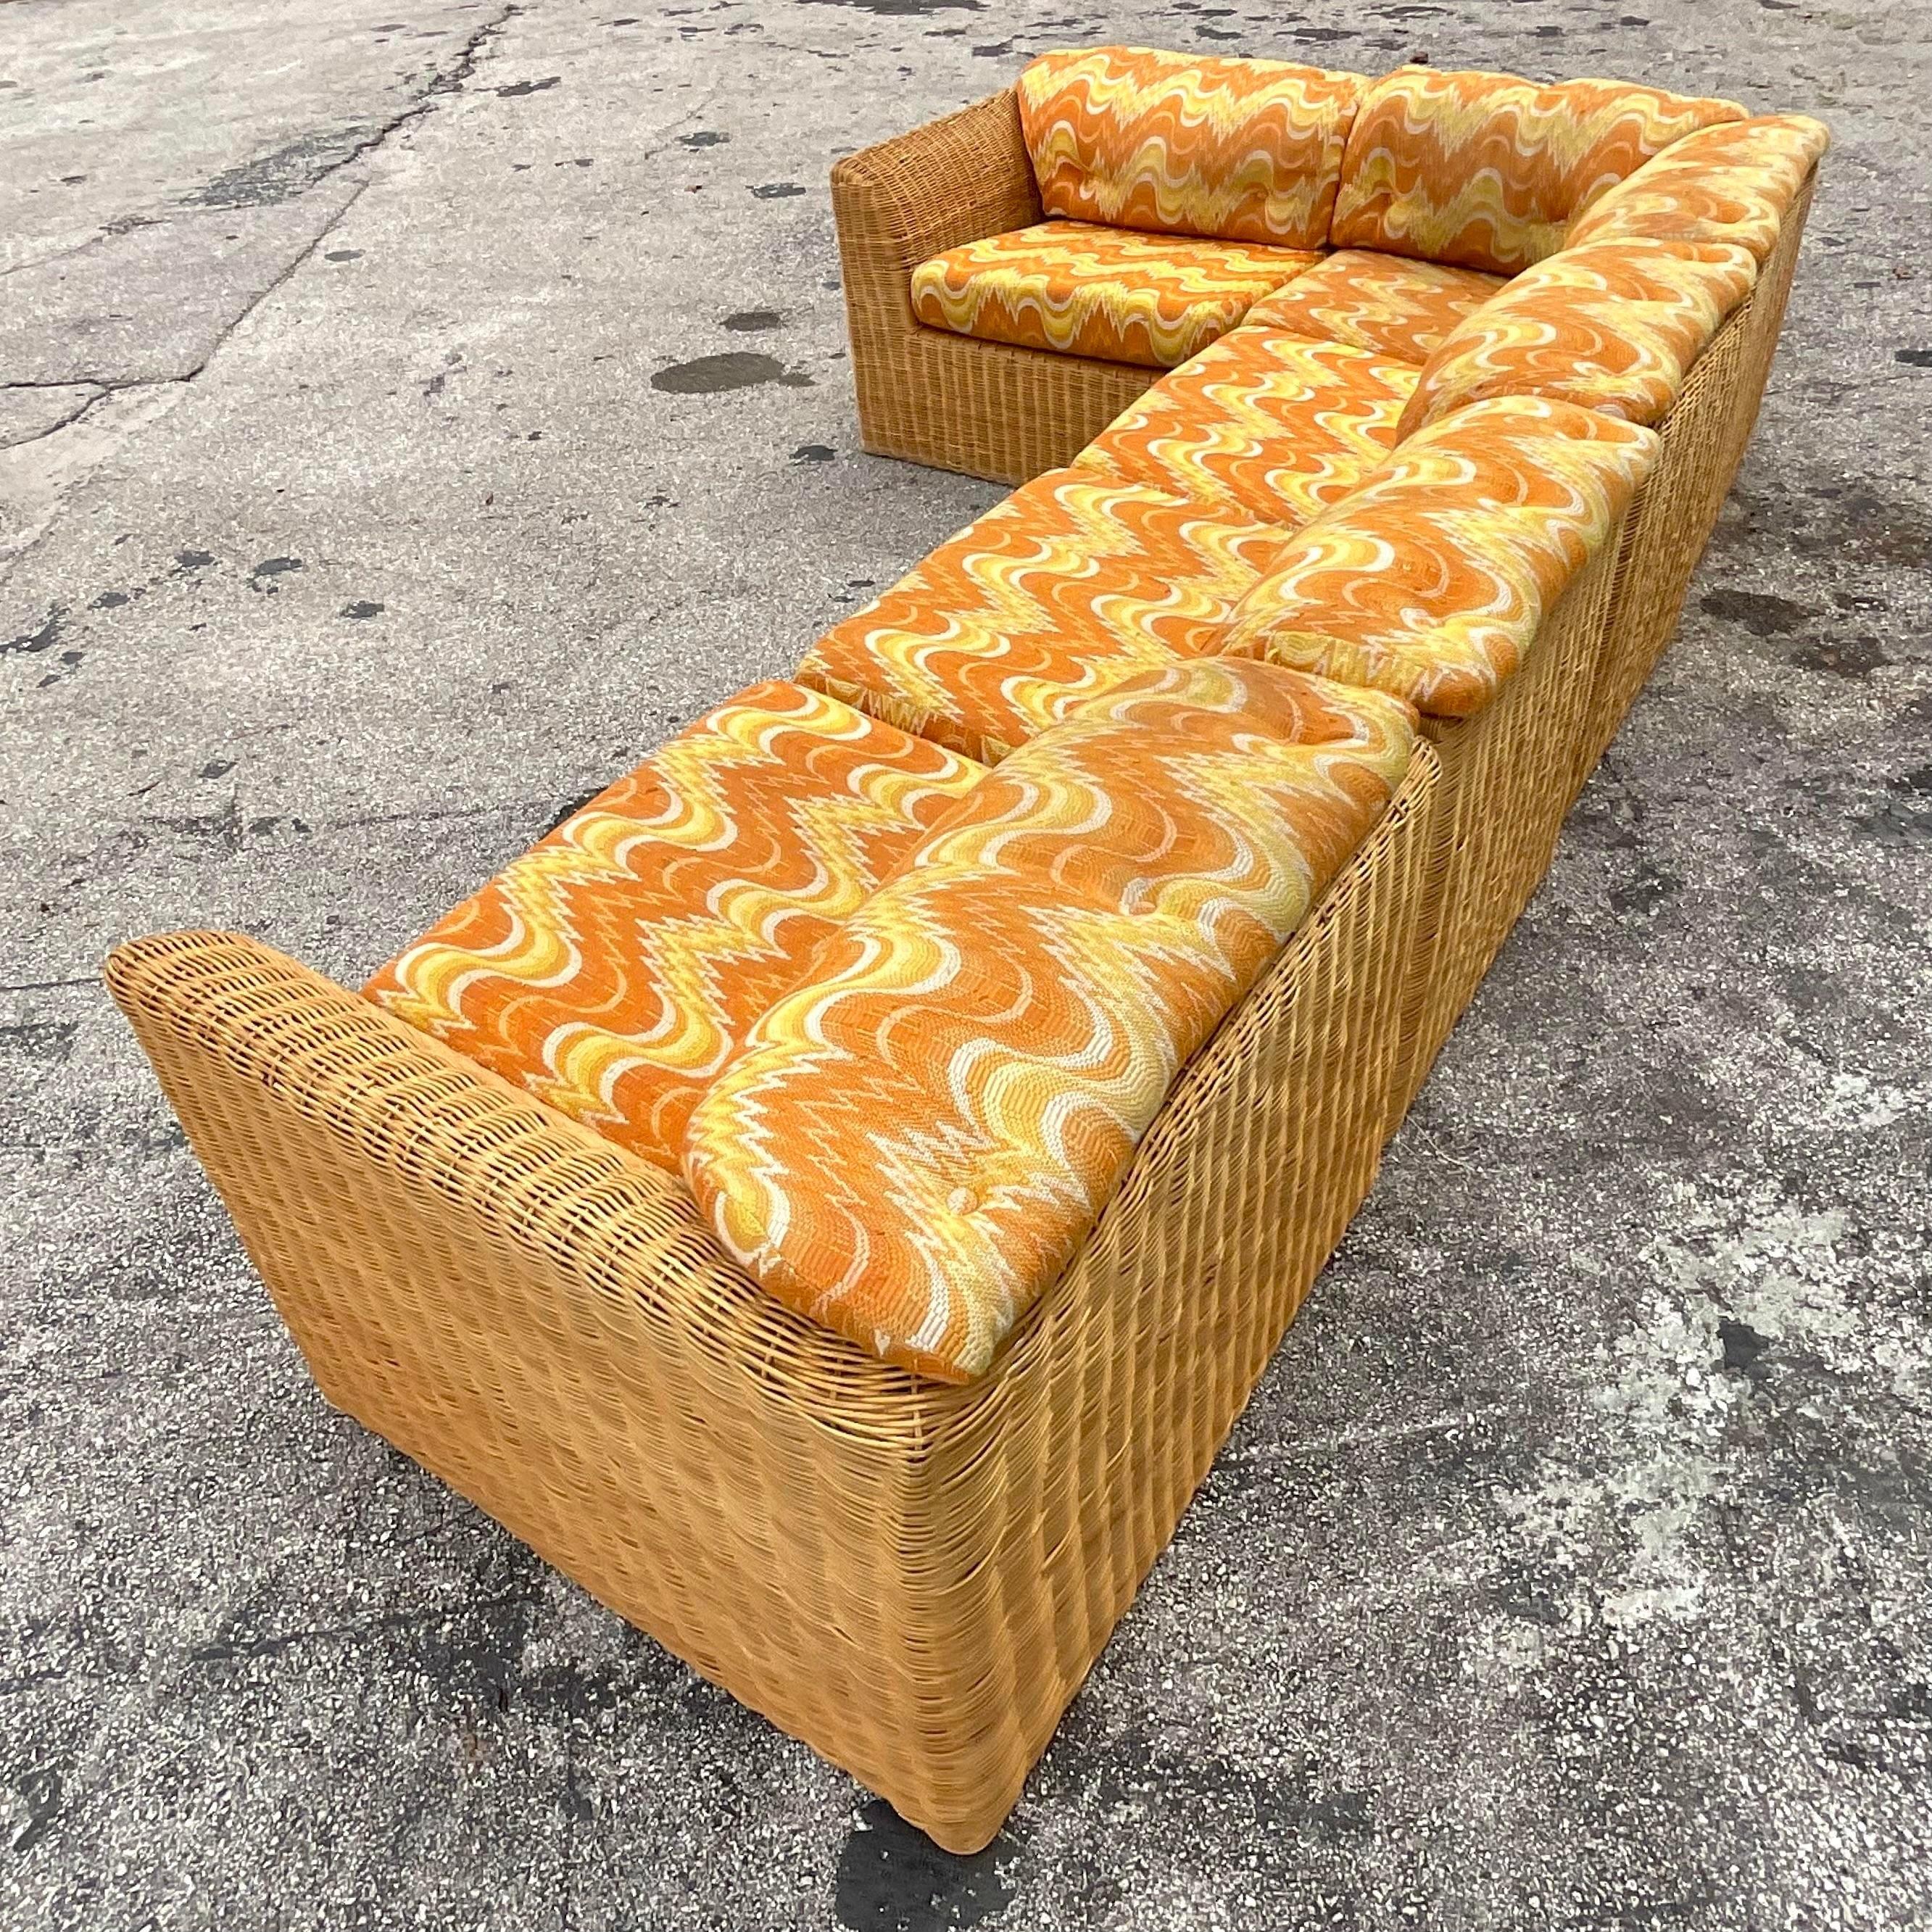 Upholstery Vintage Coastal Woven Rattan Flame Stitch Sectional Sofa